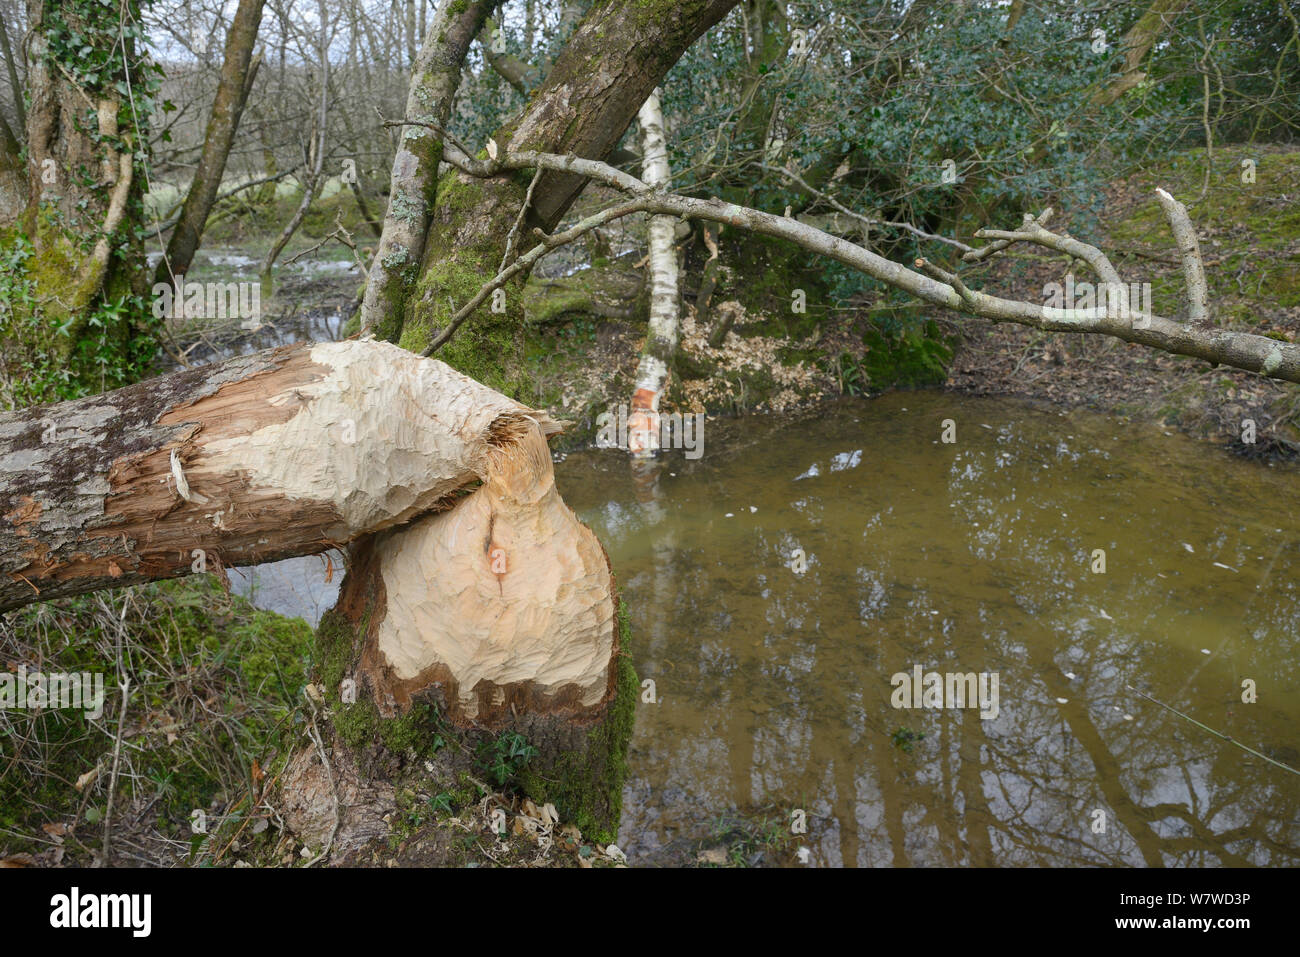 Alder tree (Alnus glutinosa) felled by Eurasian beaver (Castor fiber) within a large wet woodland stream enclosure, with felled Downy birch tree (Betula pendulosa) and a beaver dam checking the stream in the background, Devon, UK, March. Stock Photo